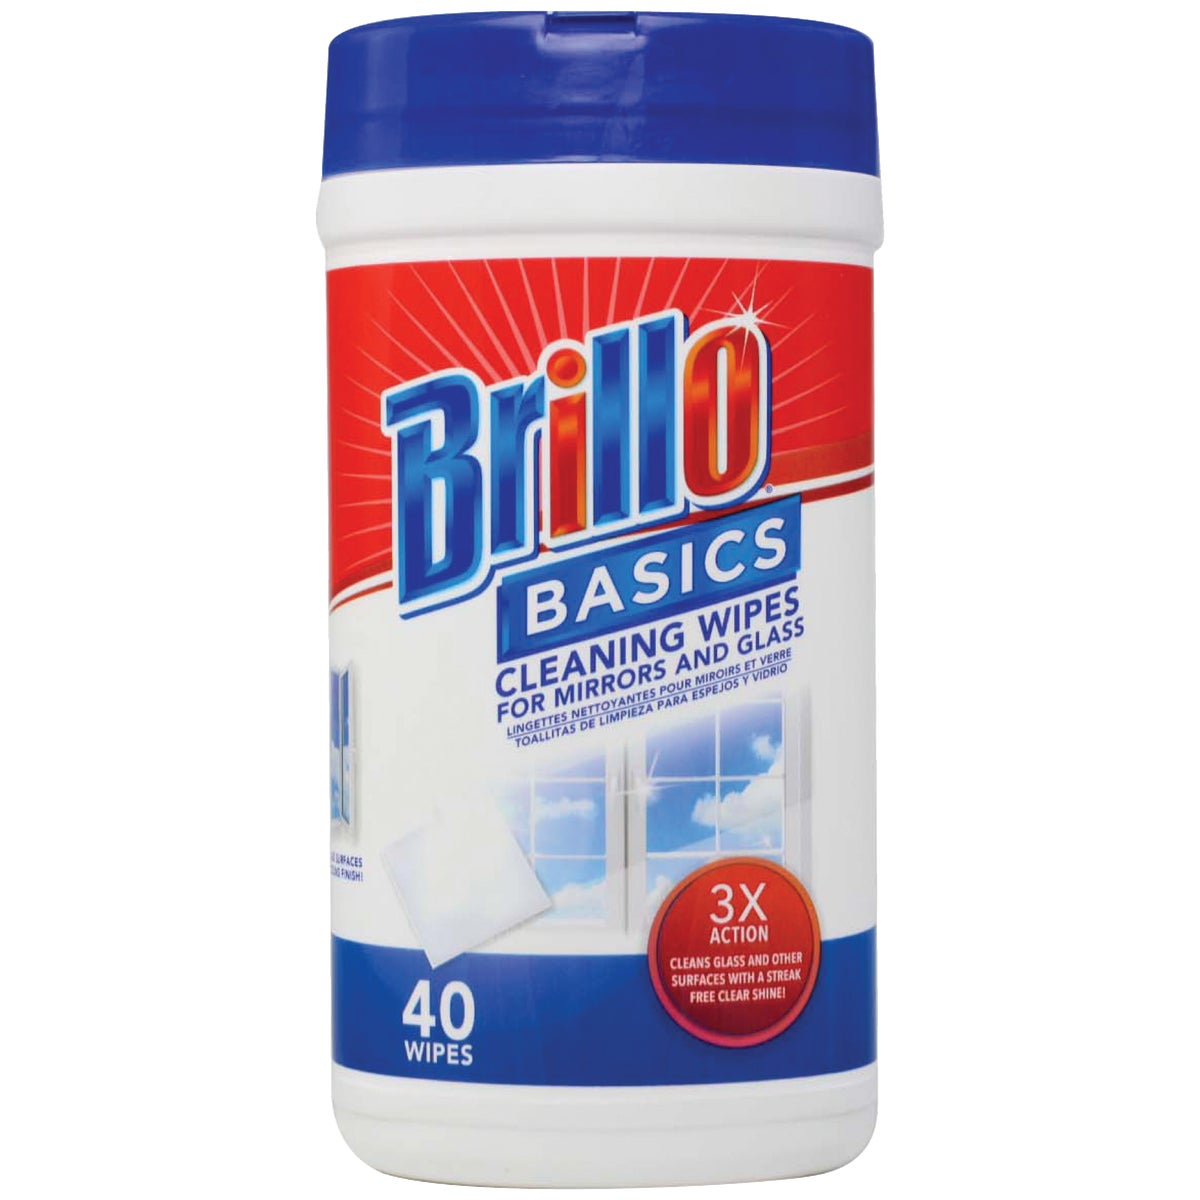 Brillo Basics 5.9 In. x 7.9 In. Wipes Glass Cleaning Wipes (40-Pack)